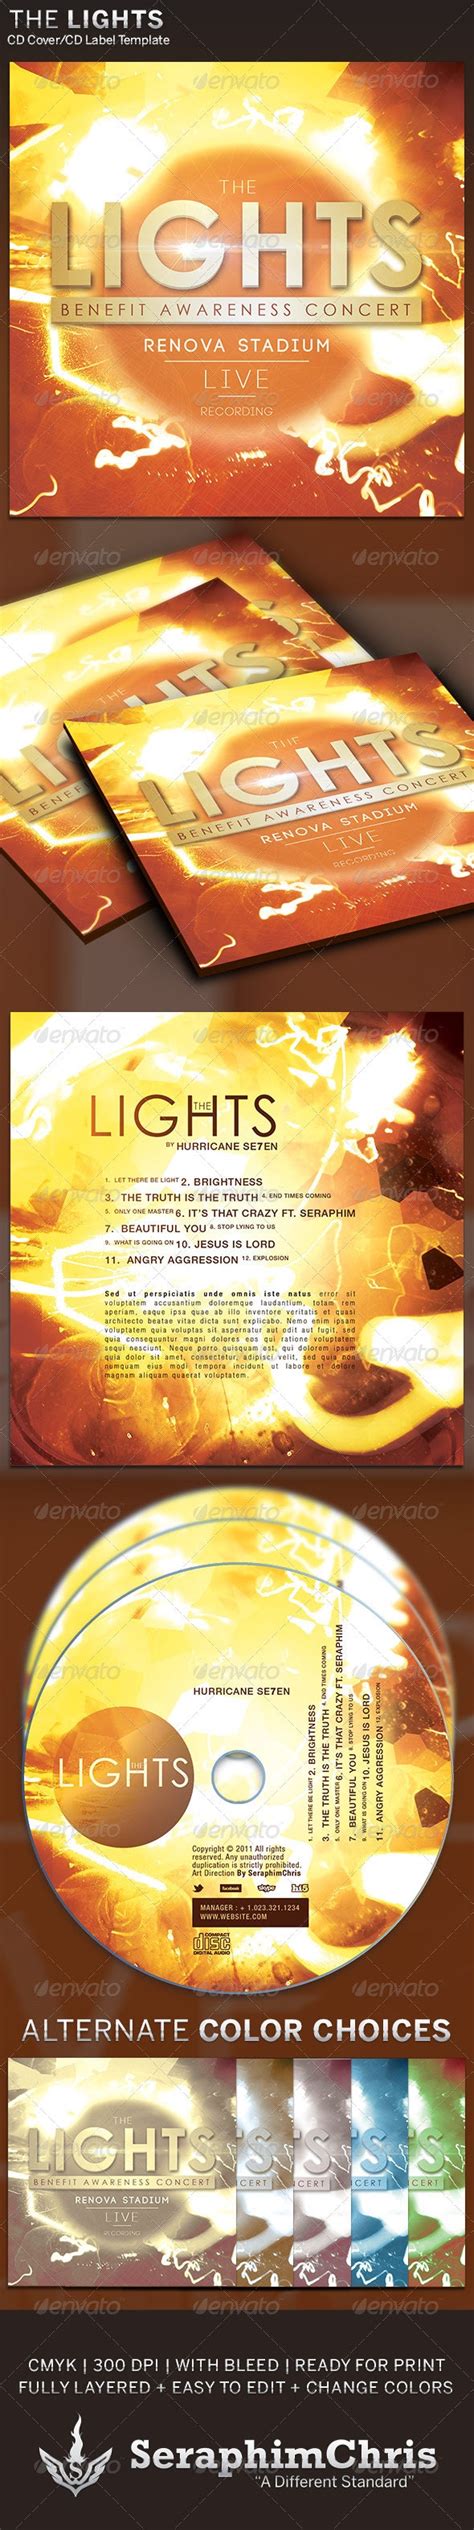 The Lights Cd Cover Artwork Template By Seraphimchris Graphicriver